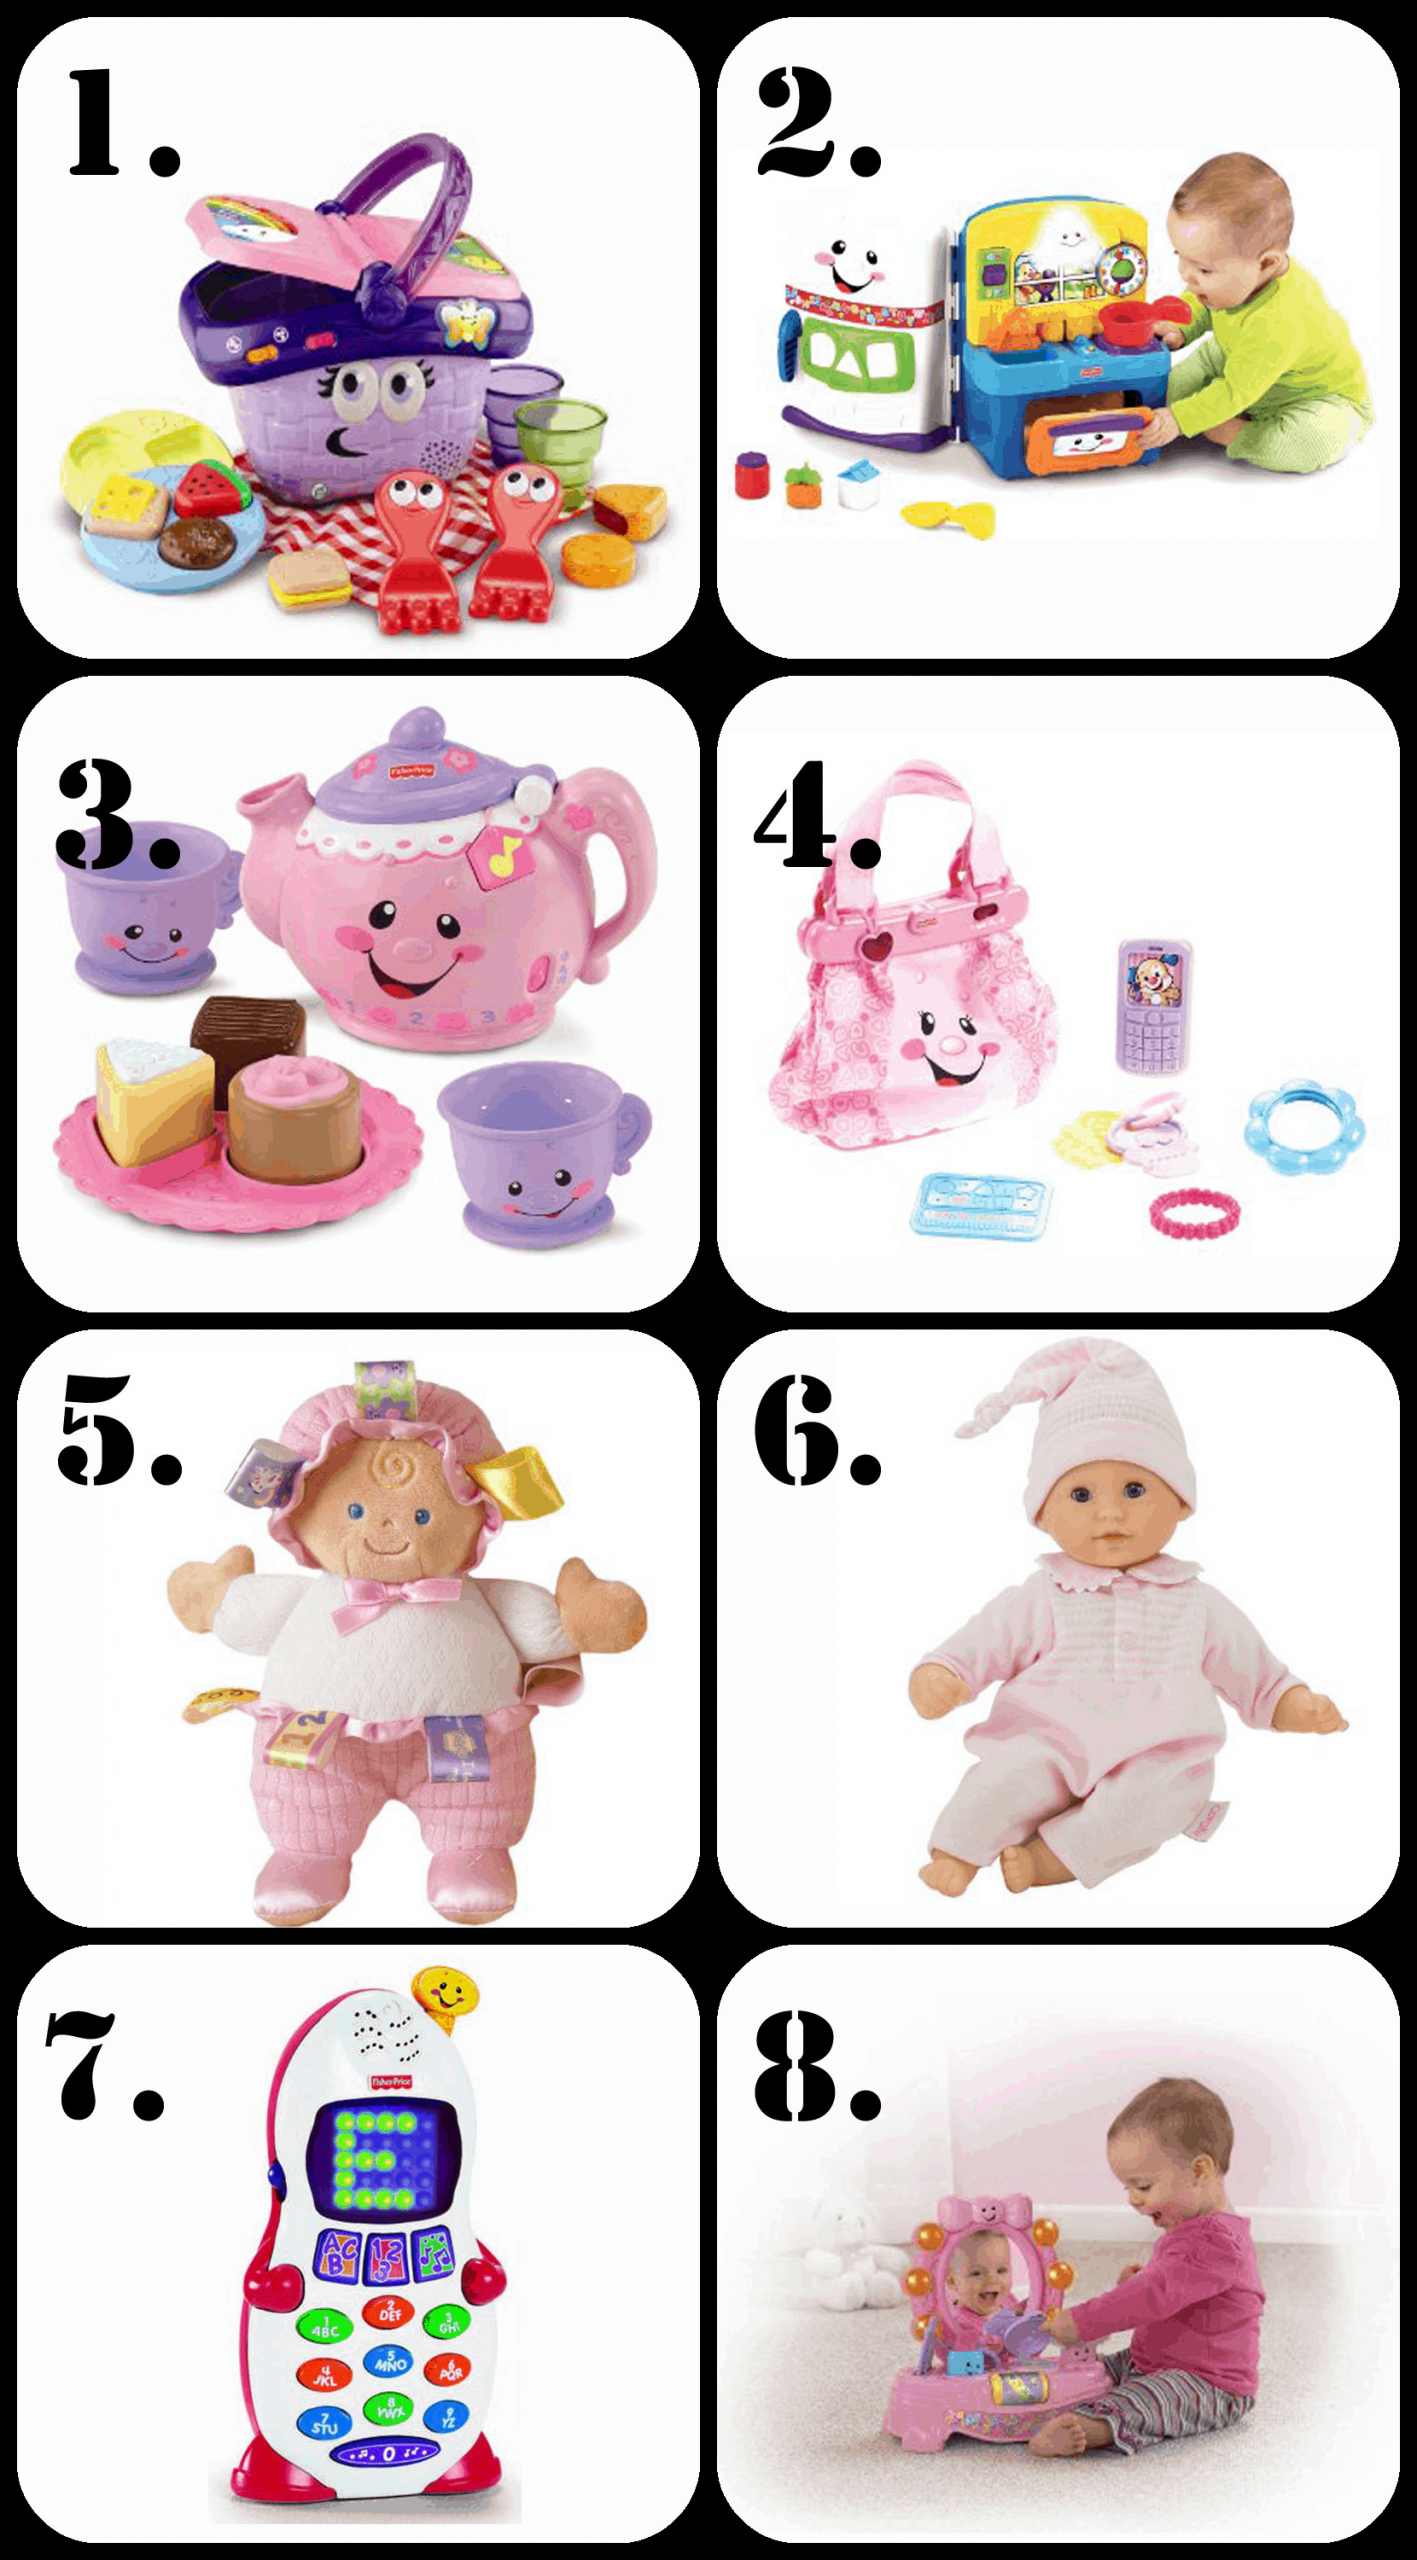 Best Gift For A One Year Old Baby Girl
 The Ultimate List of Gift Ideas for a 1 Year Old Girl